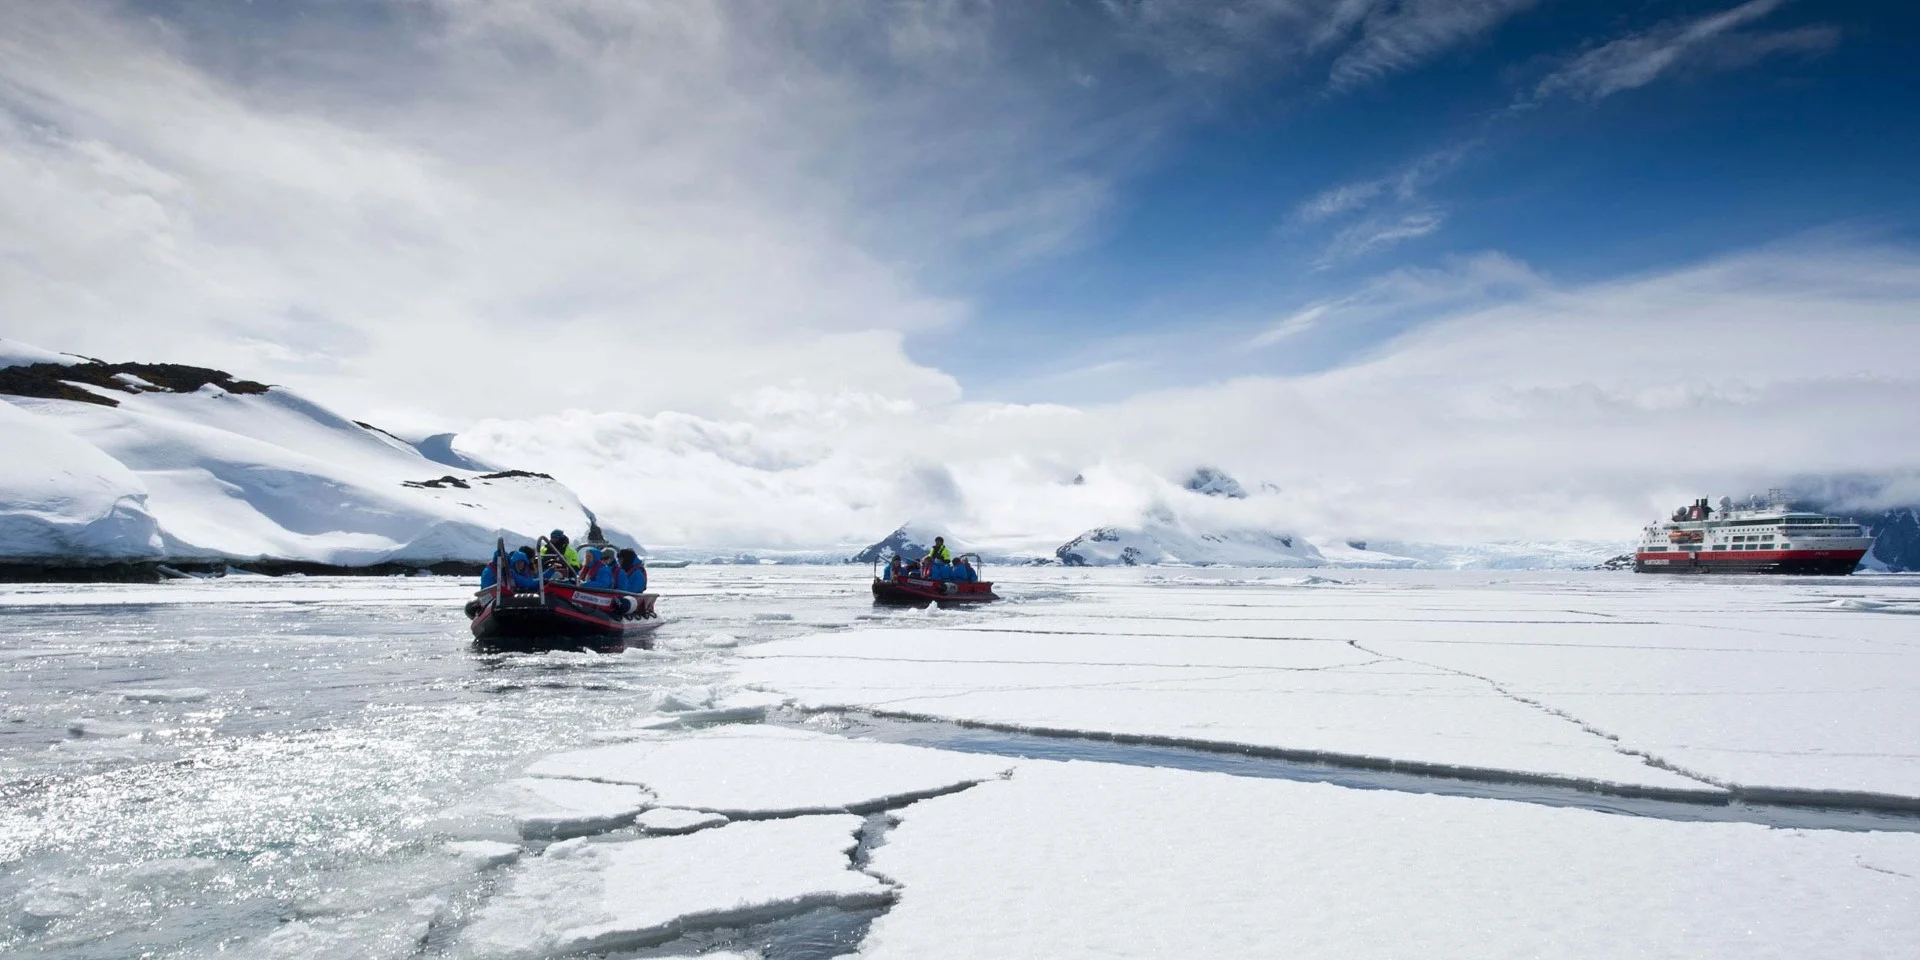 Antarctica, The Most Remote Location In The World